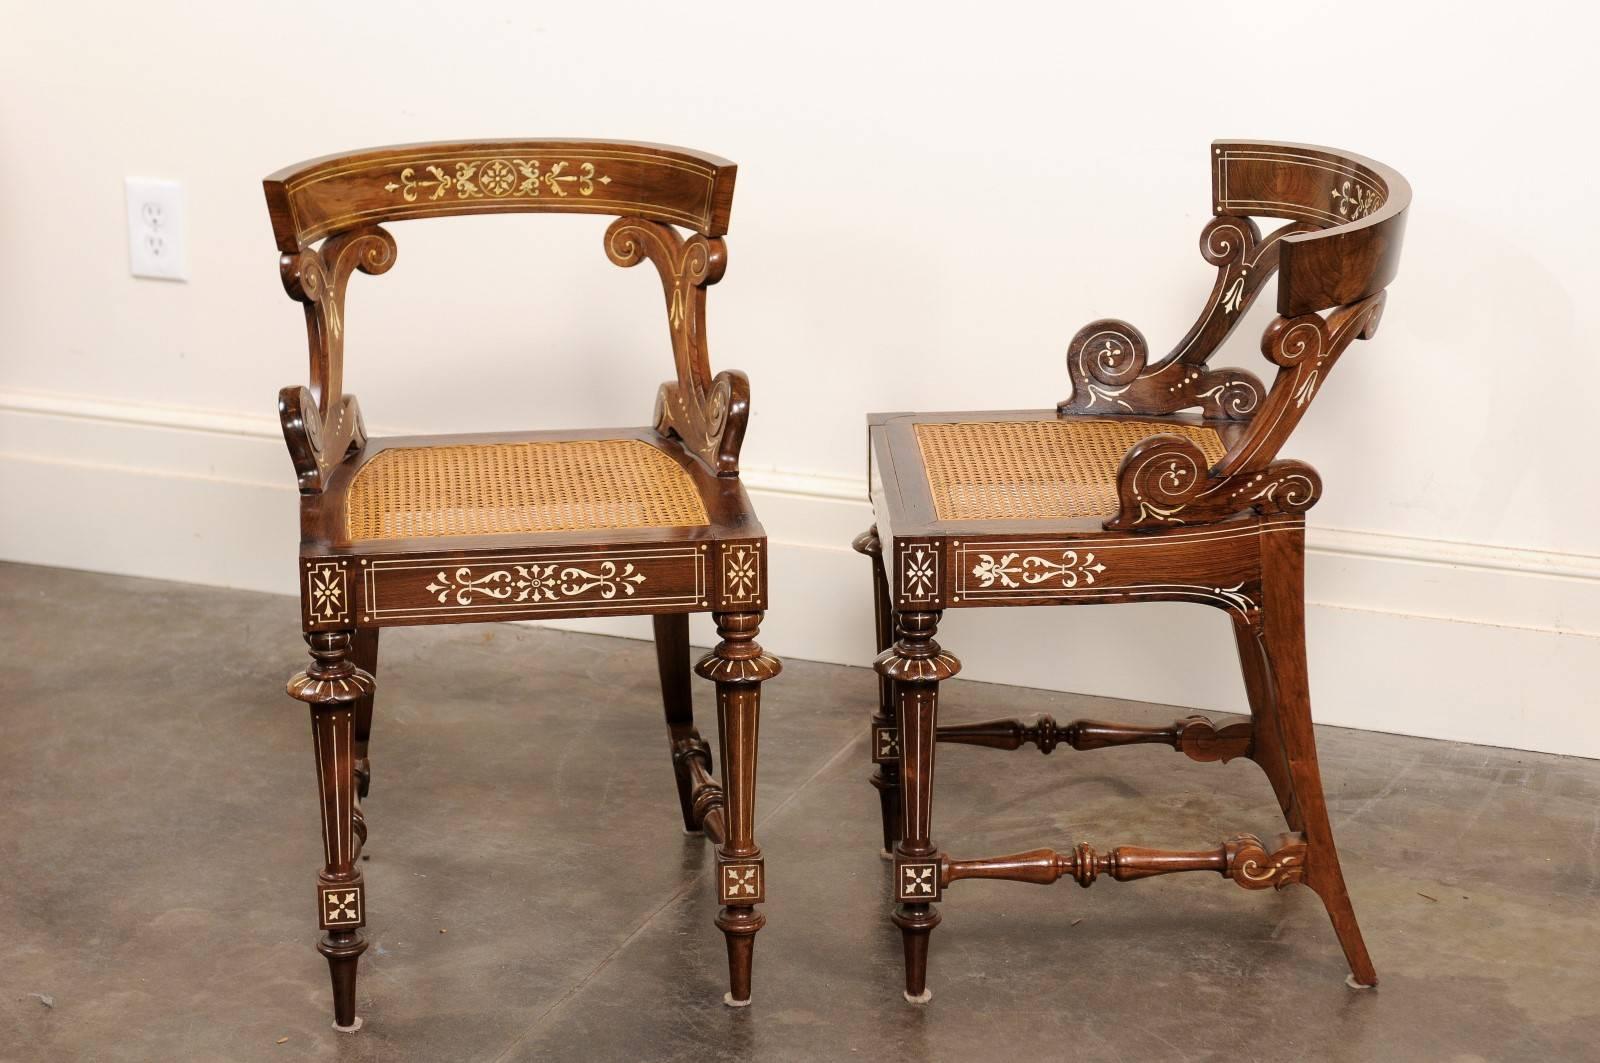 20th Century Pair of Barrel Back Wooden Slipper Chairs with Marquetry Décor and Cane Seats